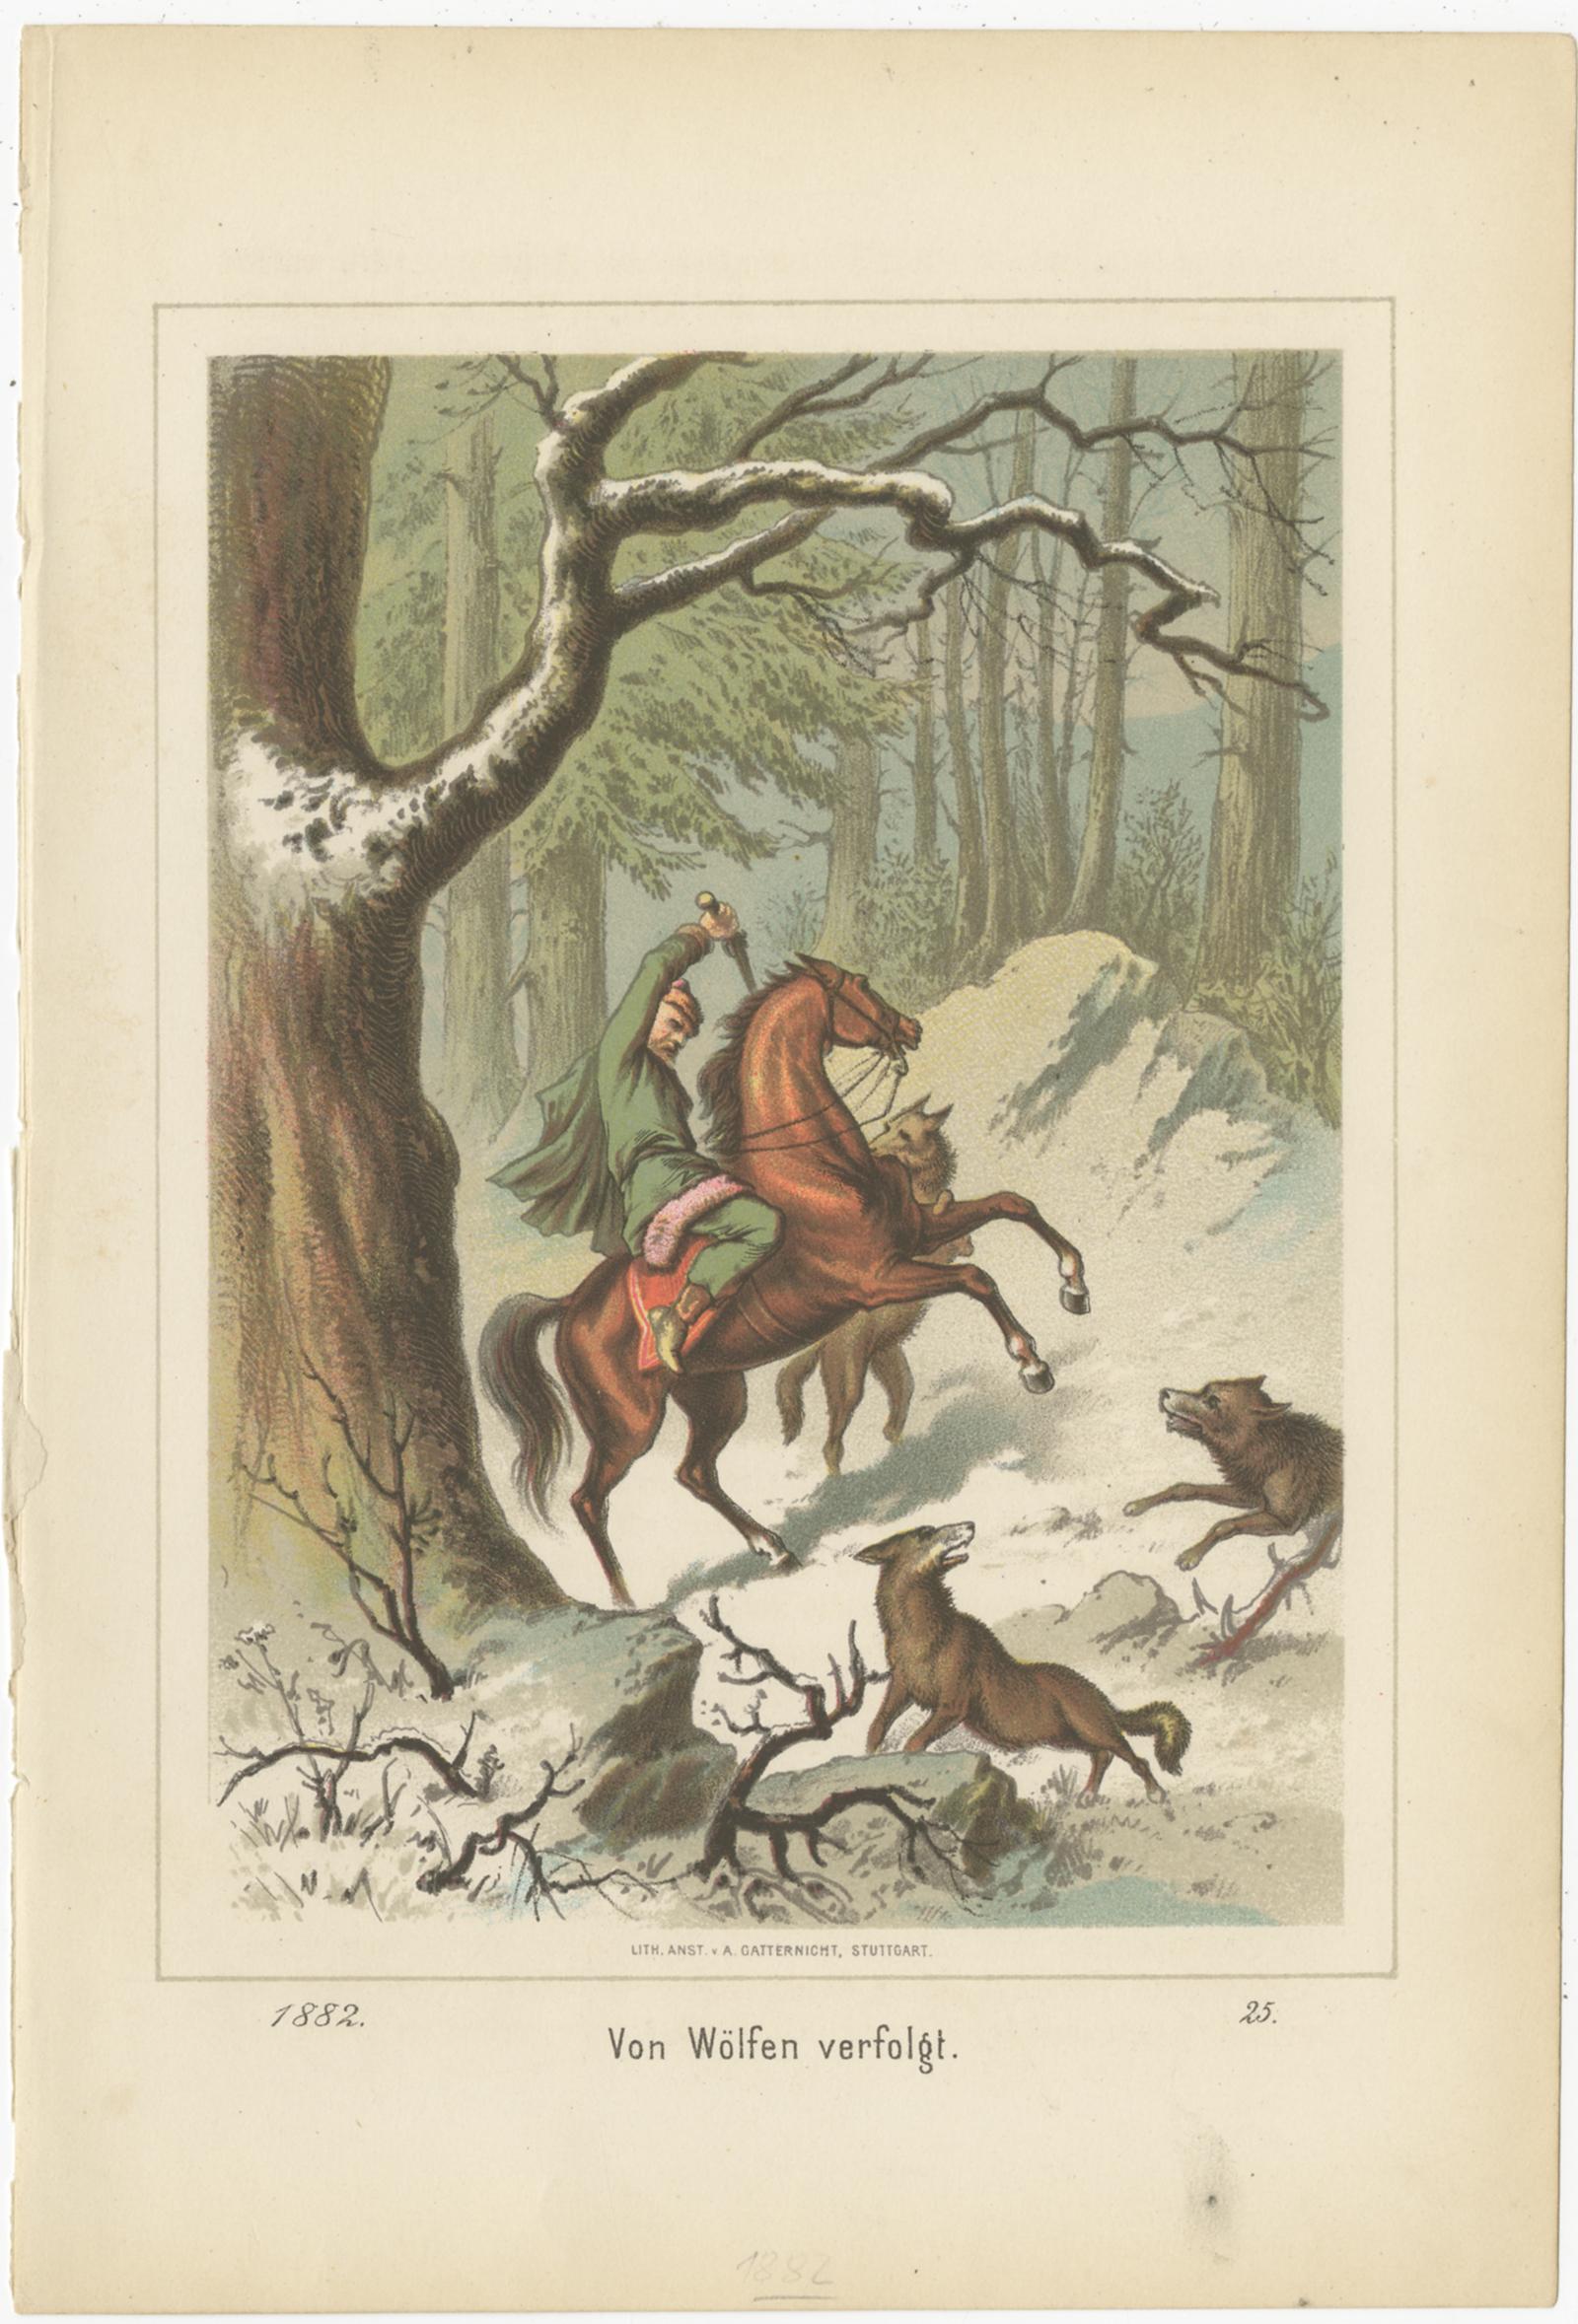 Antique print titled 'Von Wölfen verfolgt'. Original old print of a man on a horse chased by wolves. Published by A. Gatternicht, circa 1890.